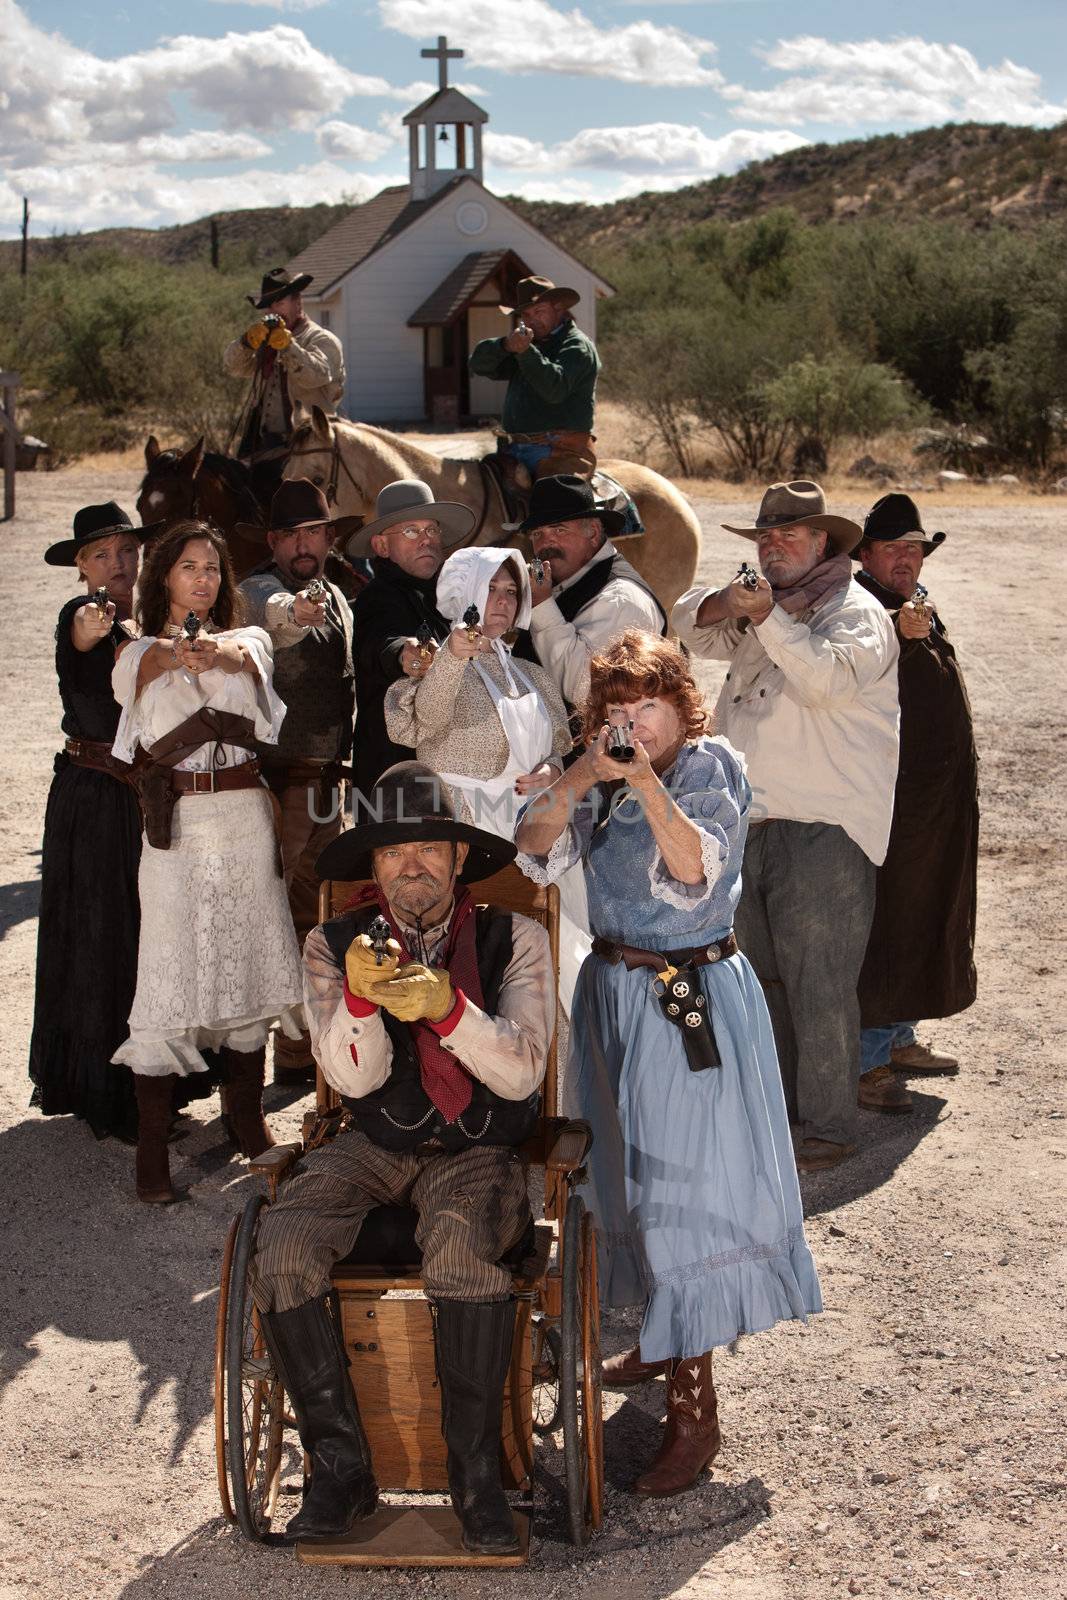 People in American old west scene with weapons in front of church